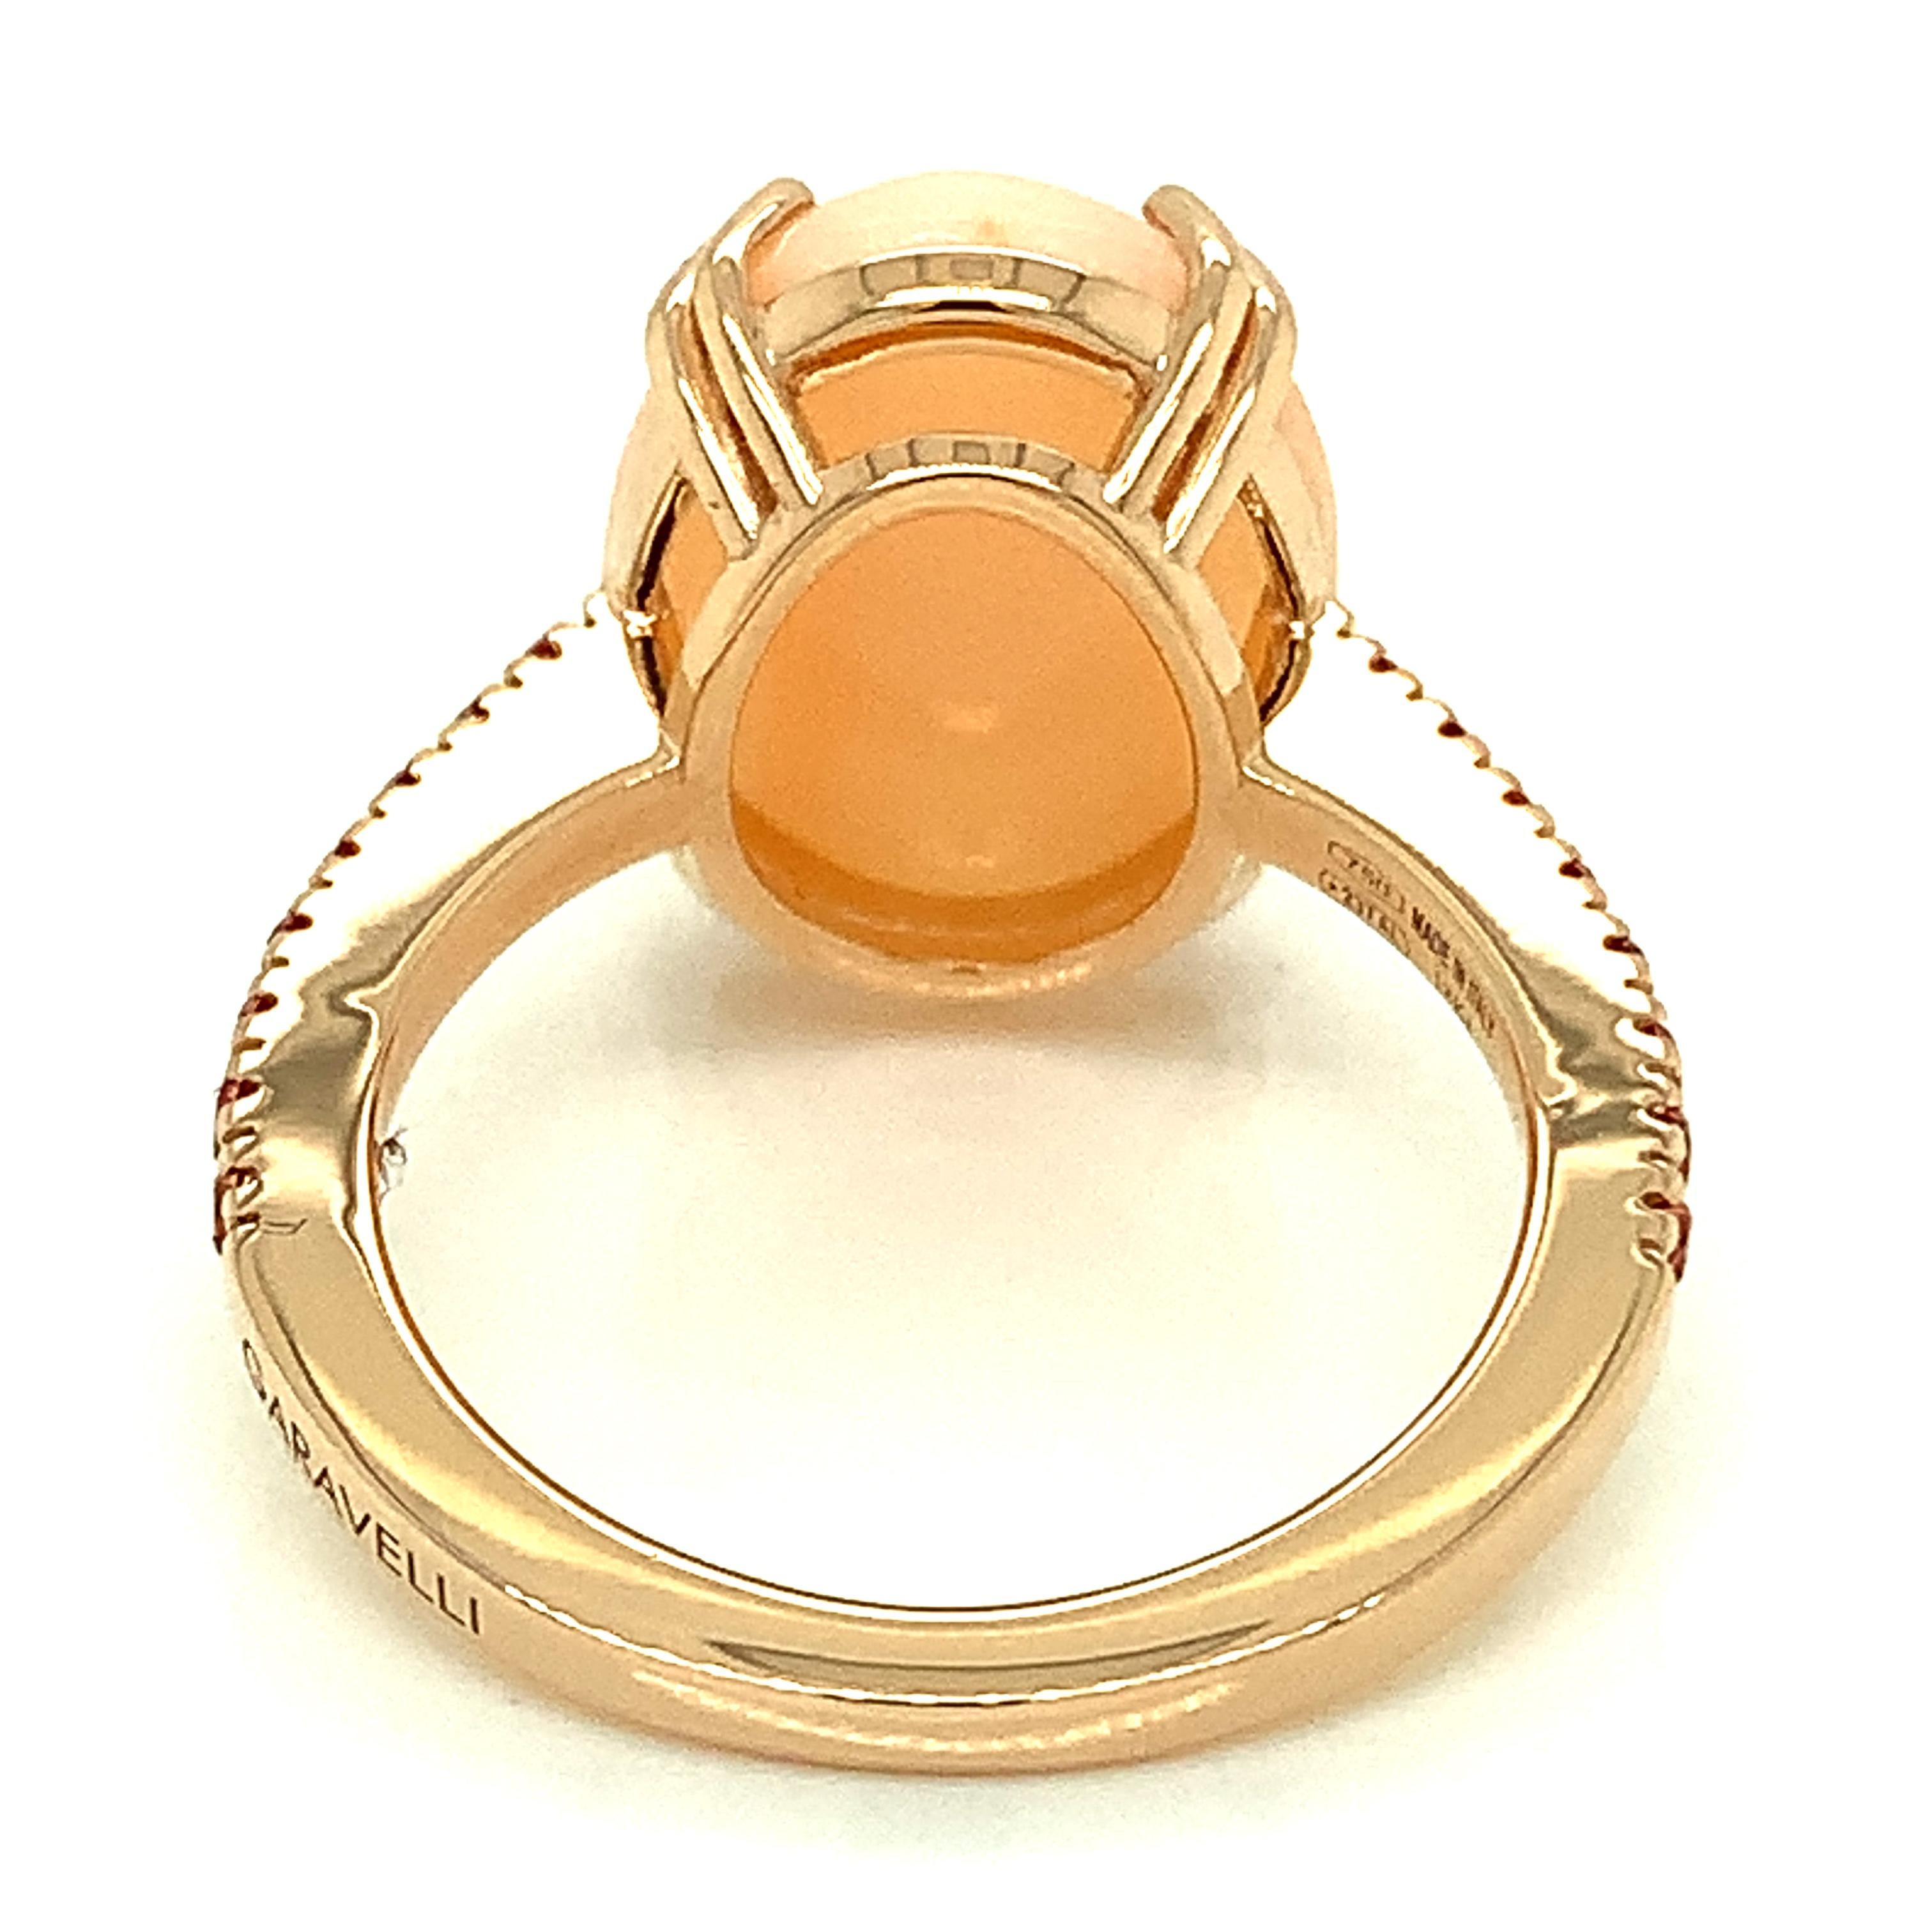 Garavelli 18 Karat Pink Gold Pink Opal and Orange Sapphires Coktail Ring.  Ring SIZE 6,25 US 52,25 EU
The cabochon is 16 x 12 mm
18KT GOLD  :GR 4.60
Orange Sapphires ct 0.35
Pink opal ct 6.16
Made in Valenza,  Italy